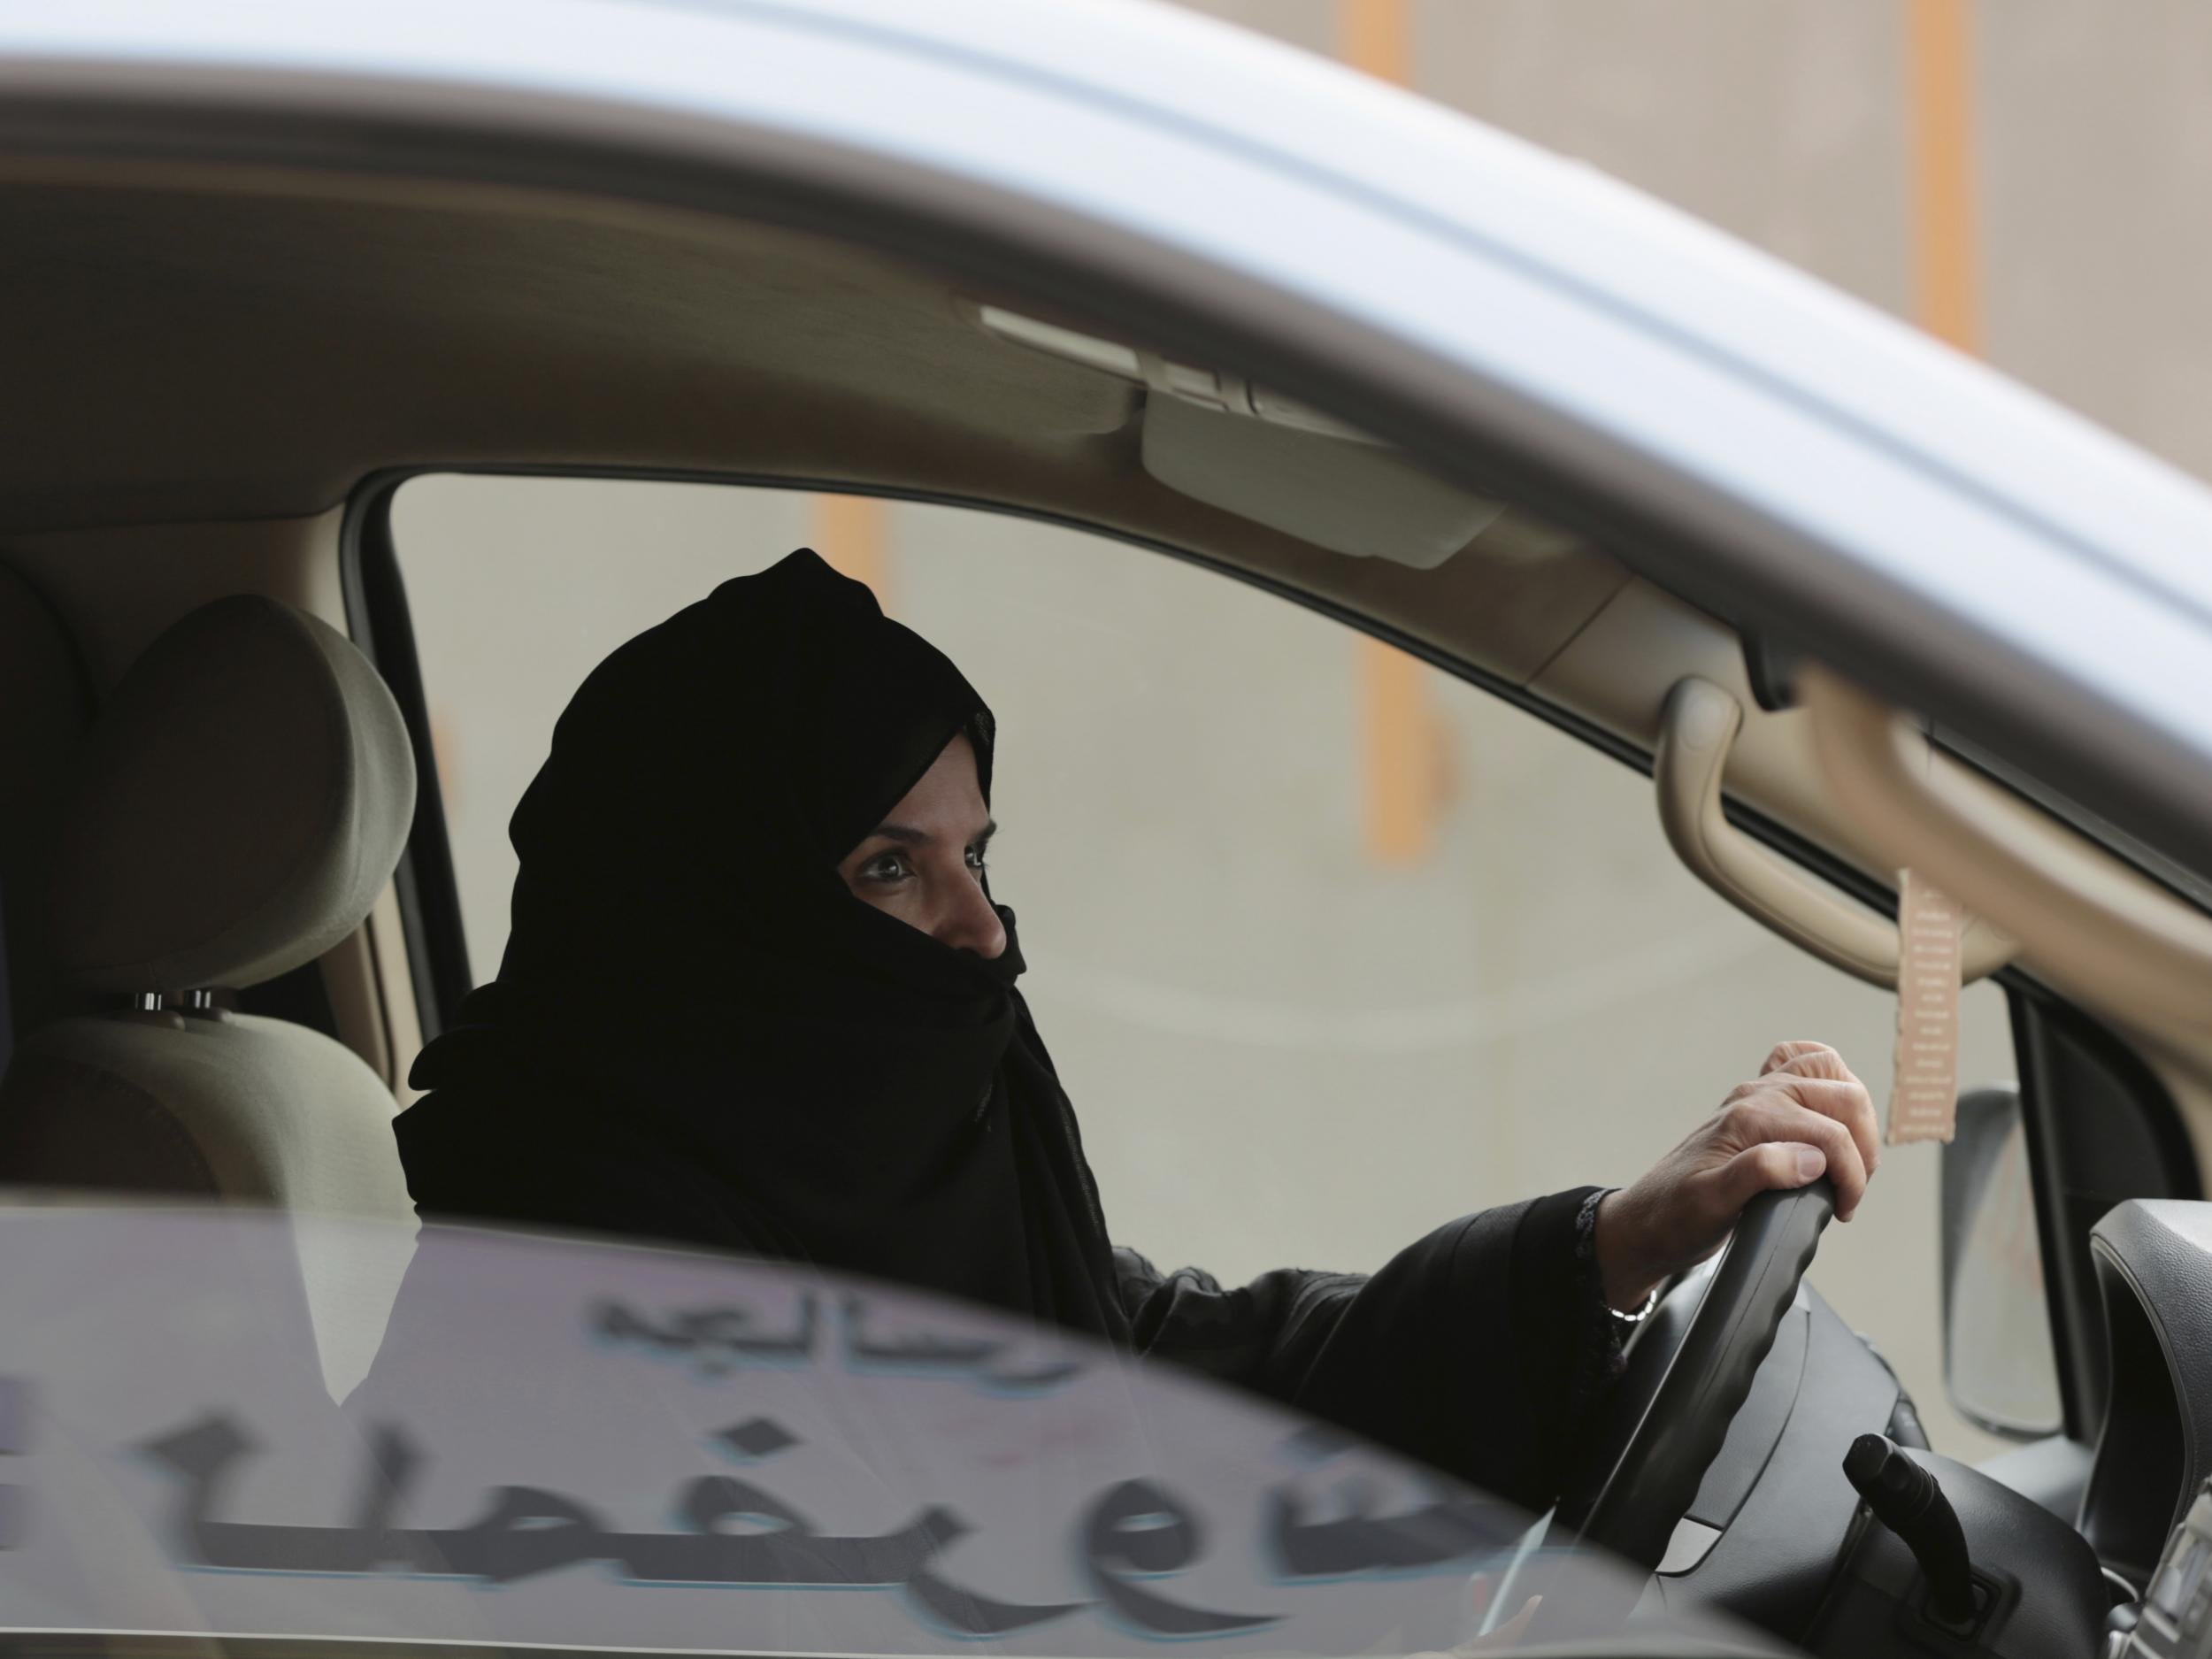 Aziza al-Yousef, arrested over the weekend, drives a car in Riyadh in 2014 as part of a campaign to defy Saudi Arabia’s ban on women driving